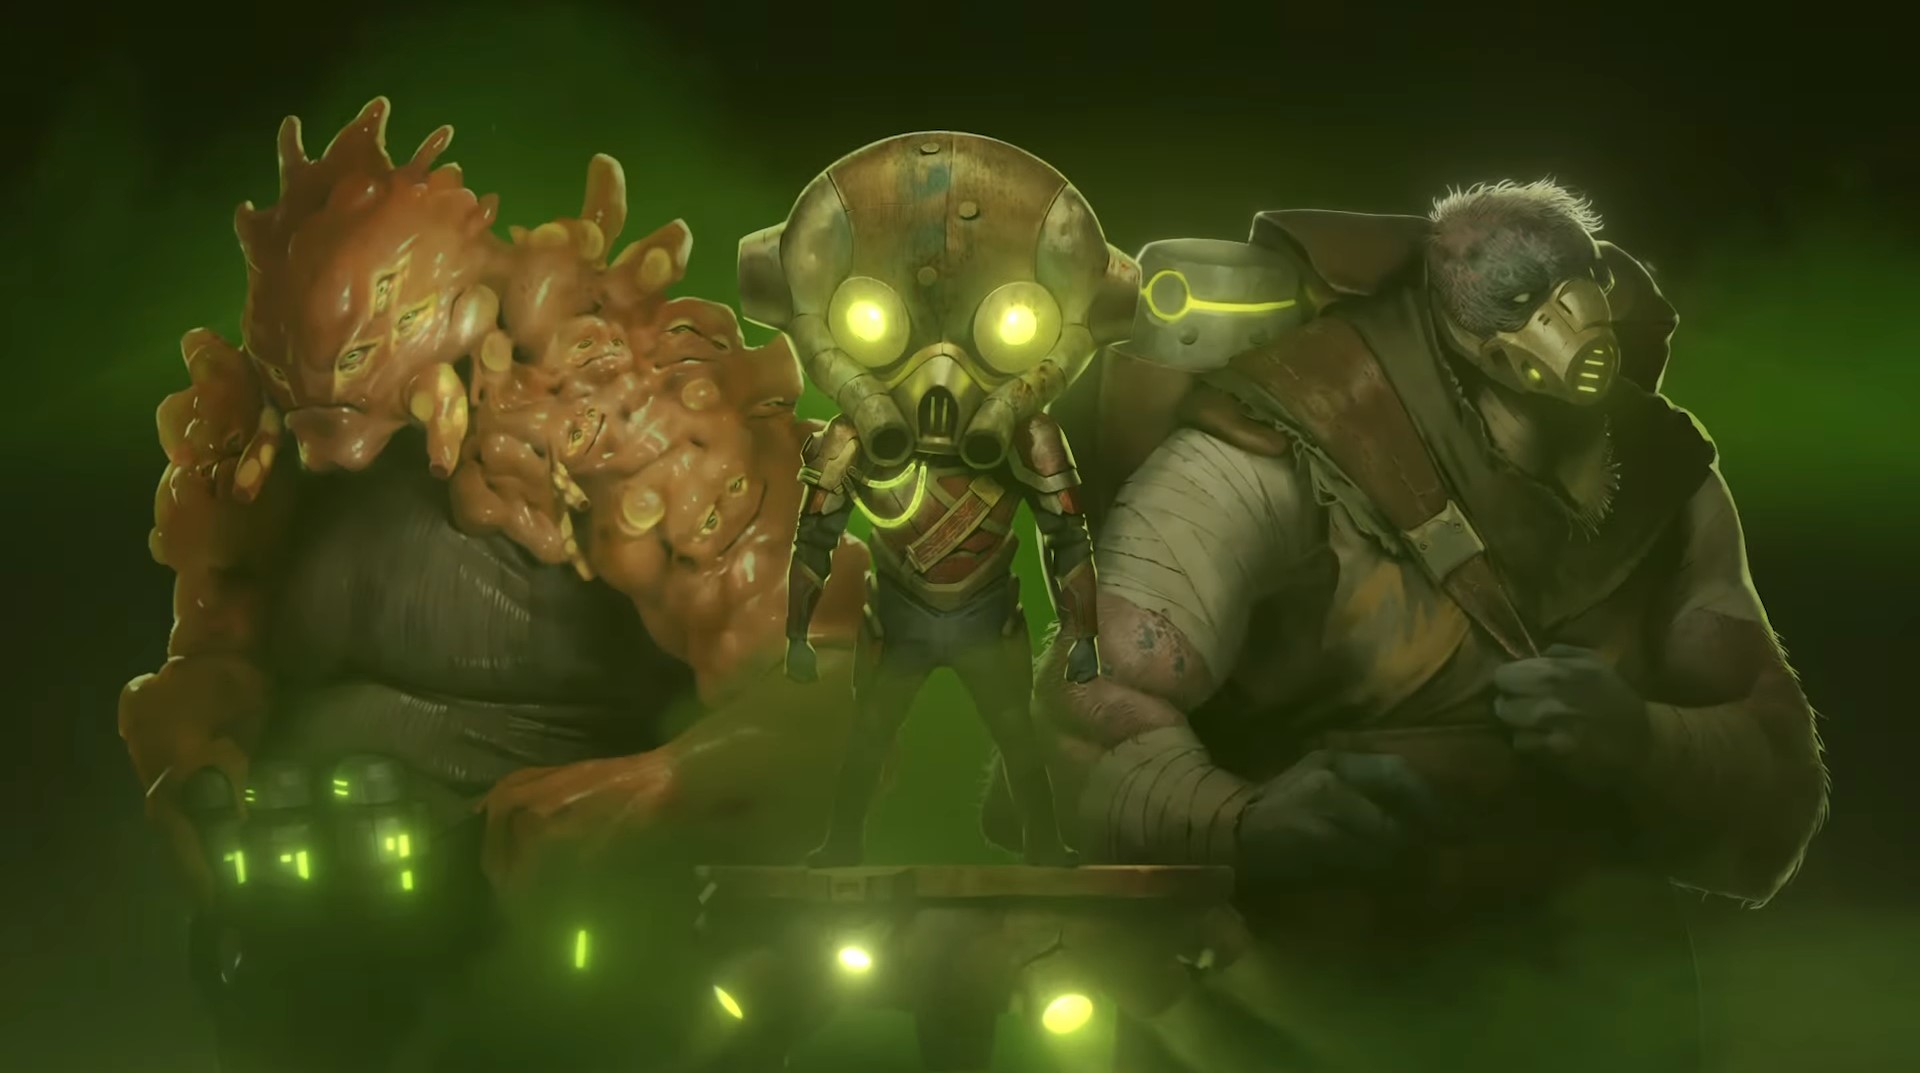 Stellaris is getting new Toxoids Species DLC with mutagenic traits